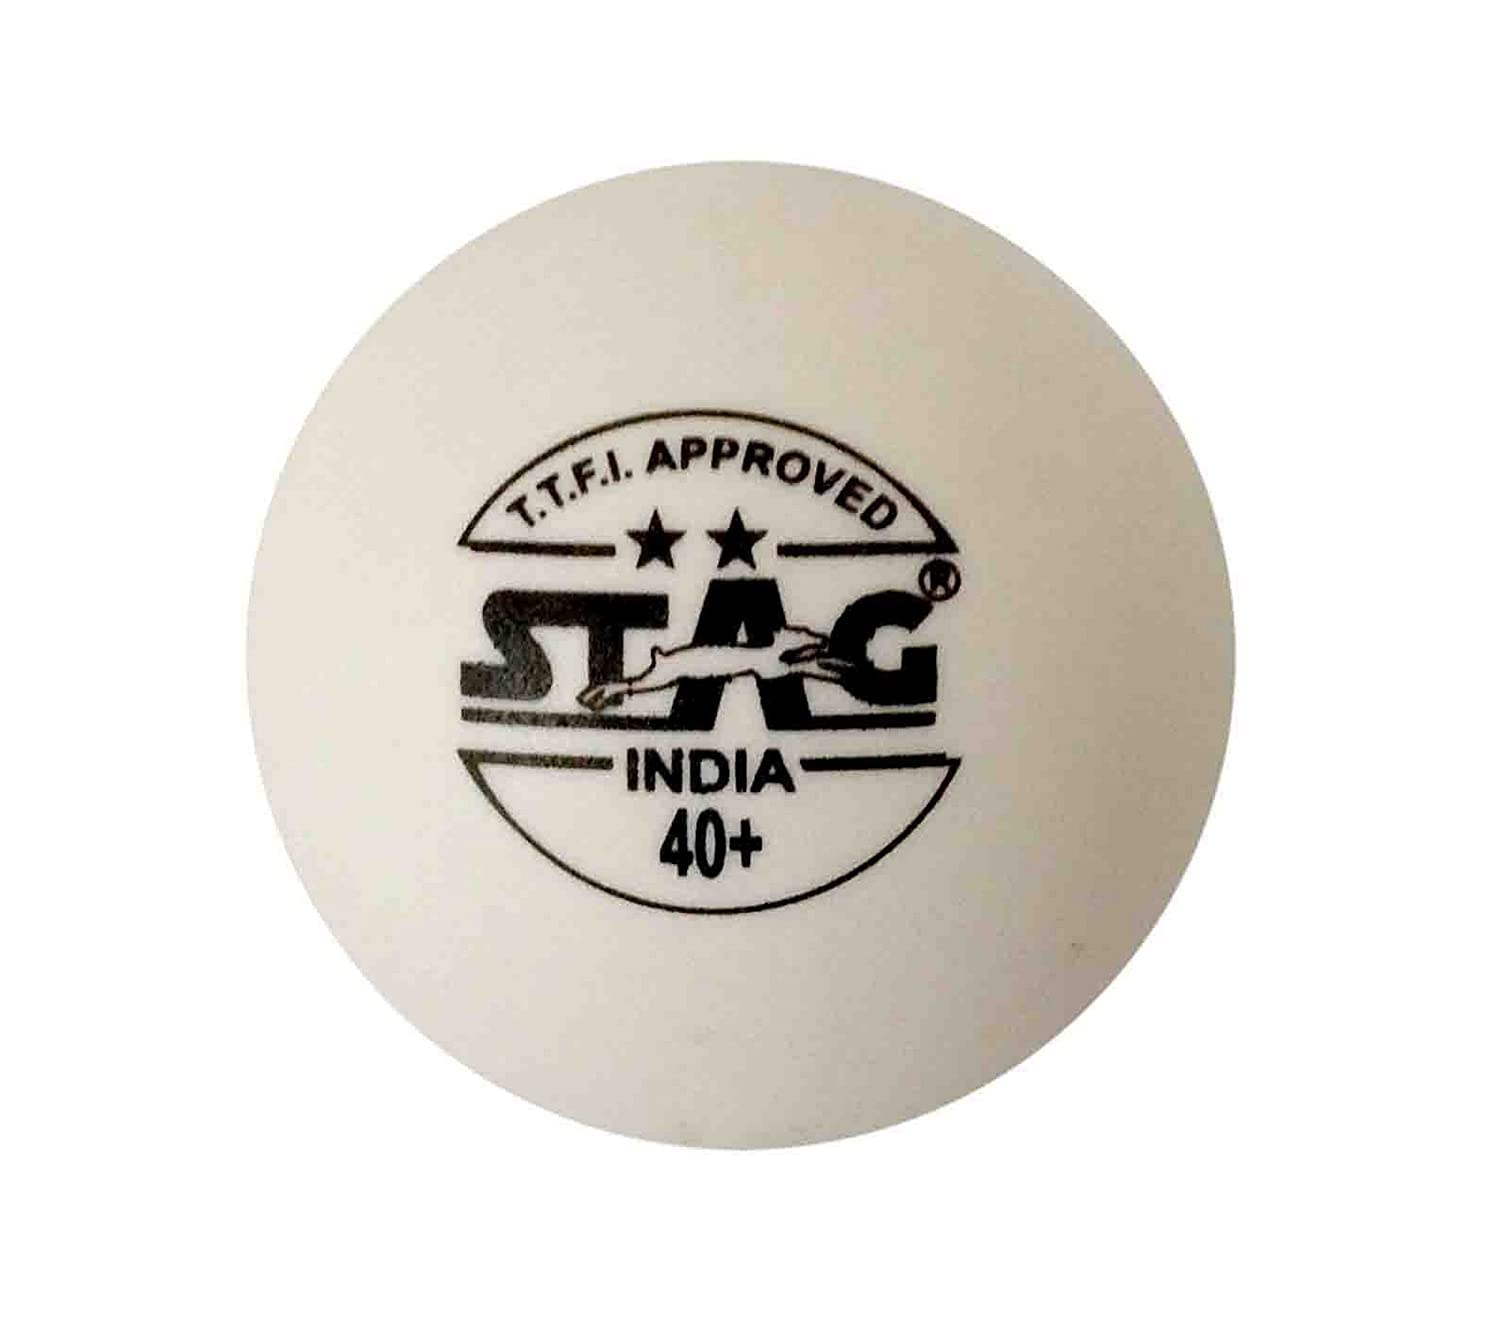 Stag 2 Star Table Tennis (T.T) Balls| Advanced High Performance 40+mm Ping Pong Balls for Training